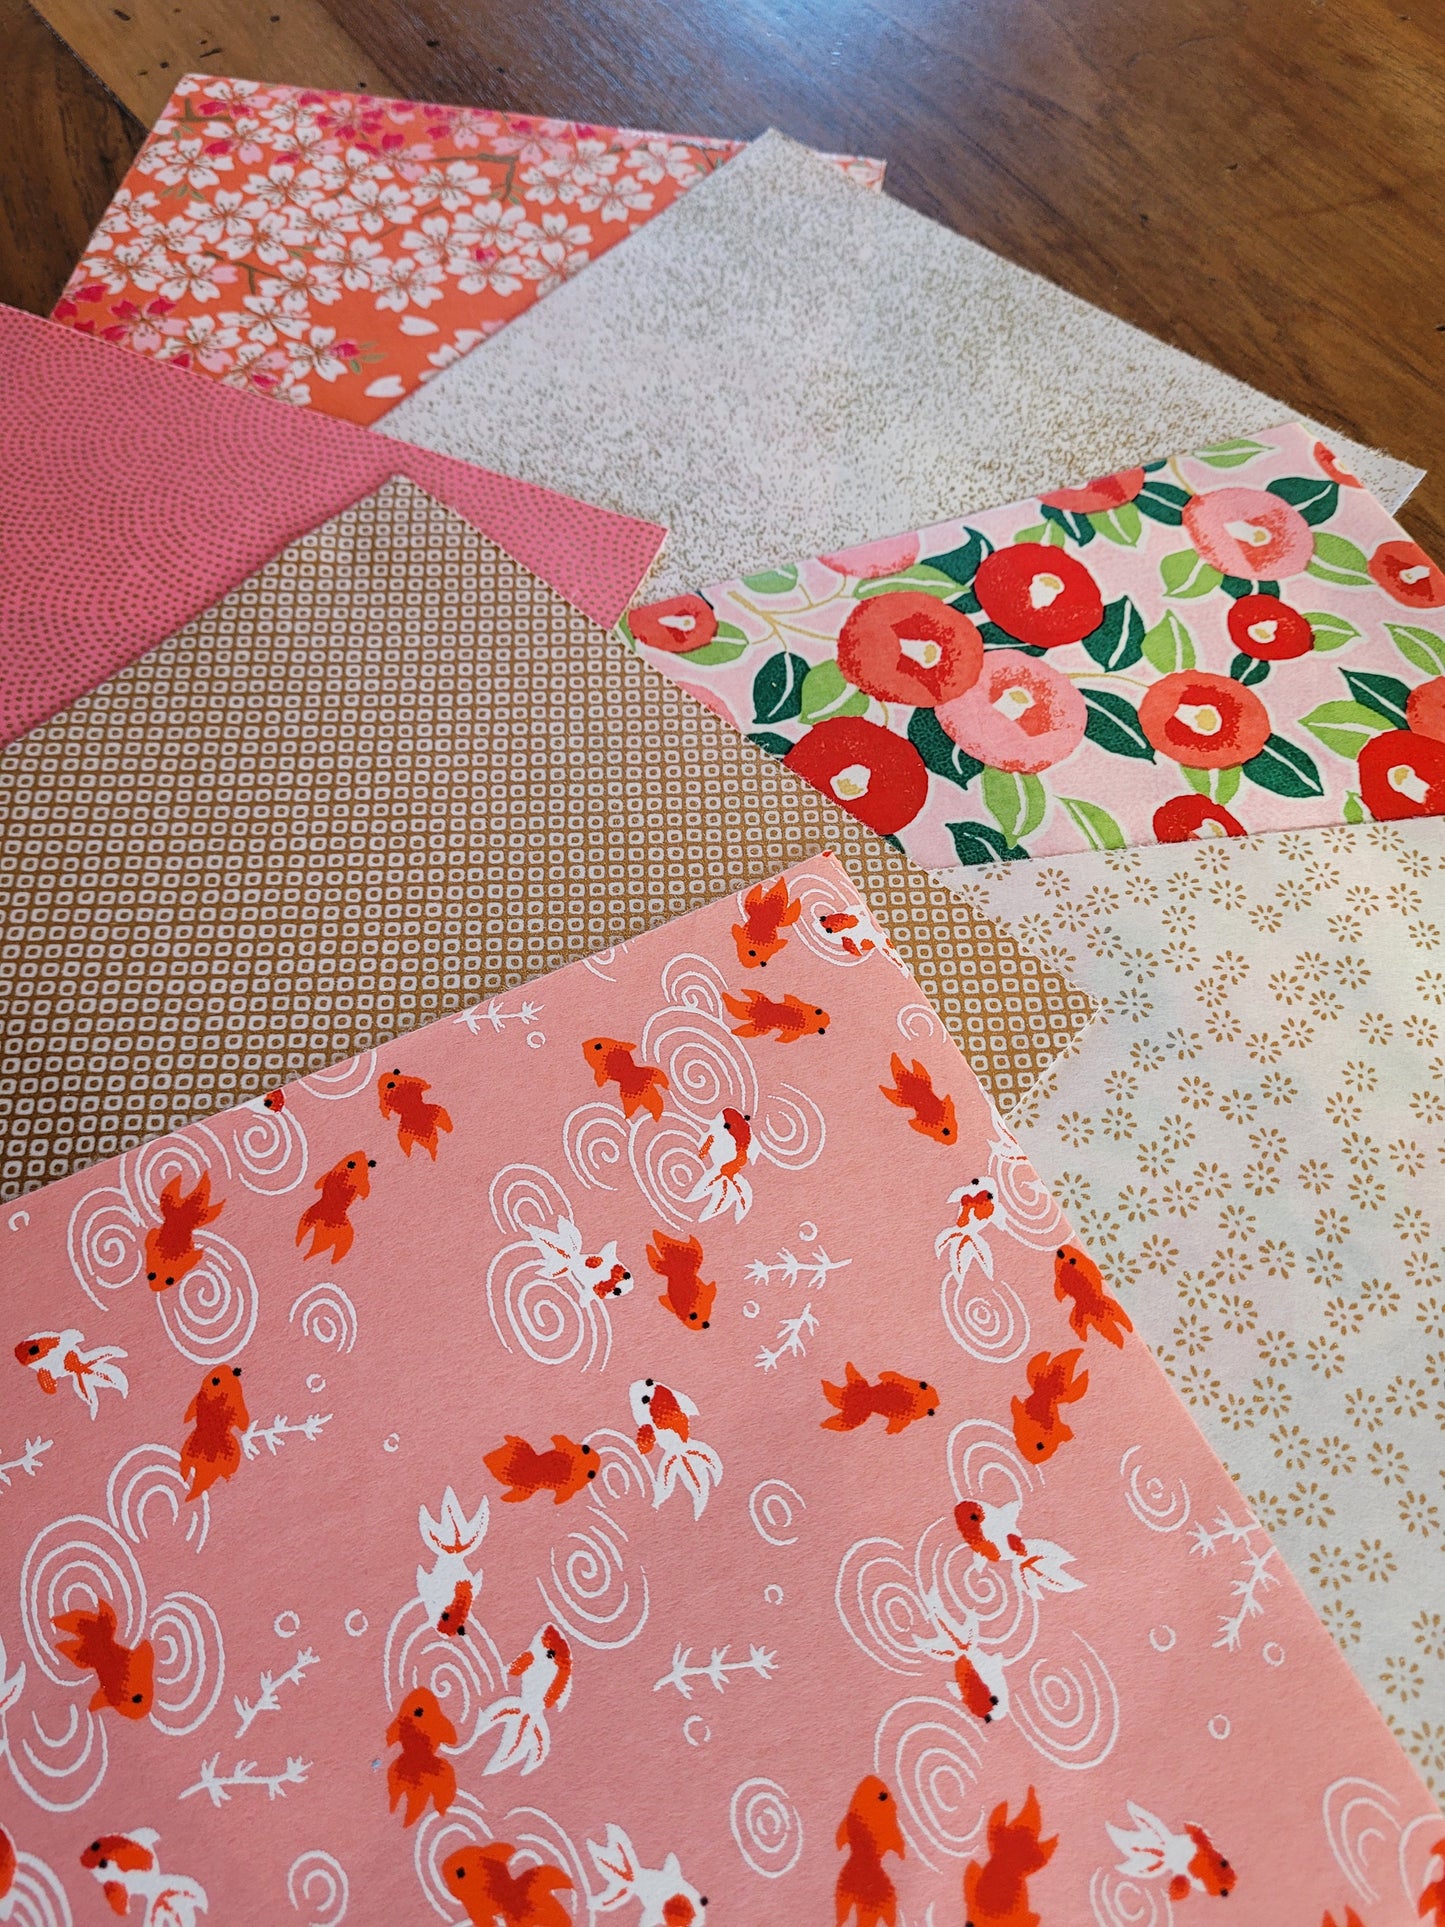 Kit of 7 Japanese origami papers - "Camellia" - Pink, coral, gold